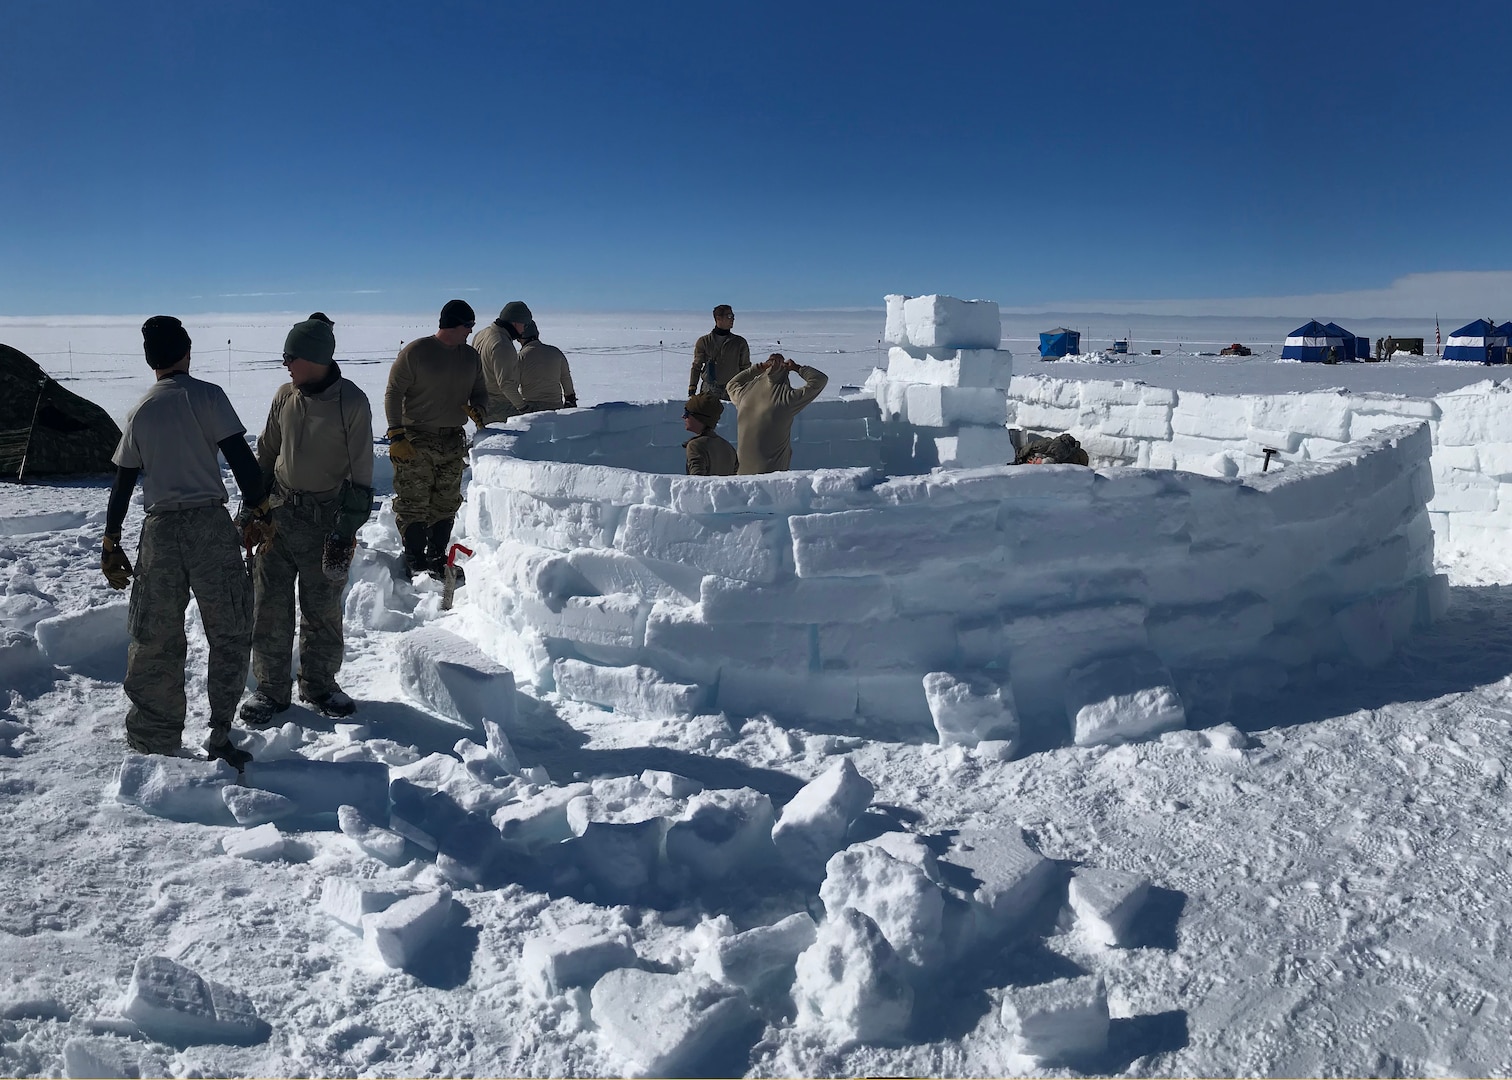 Airmen from the New York Air National Guard’s 109th Airlift Wing take part in Barren Land Arctic Survival Training at Raven Camp, Greenland. Students spend three days on the polar icecap learning to survive in barren arctic conditions.